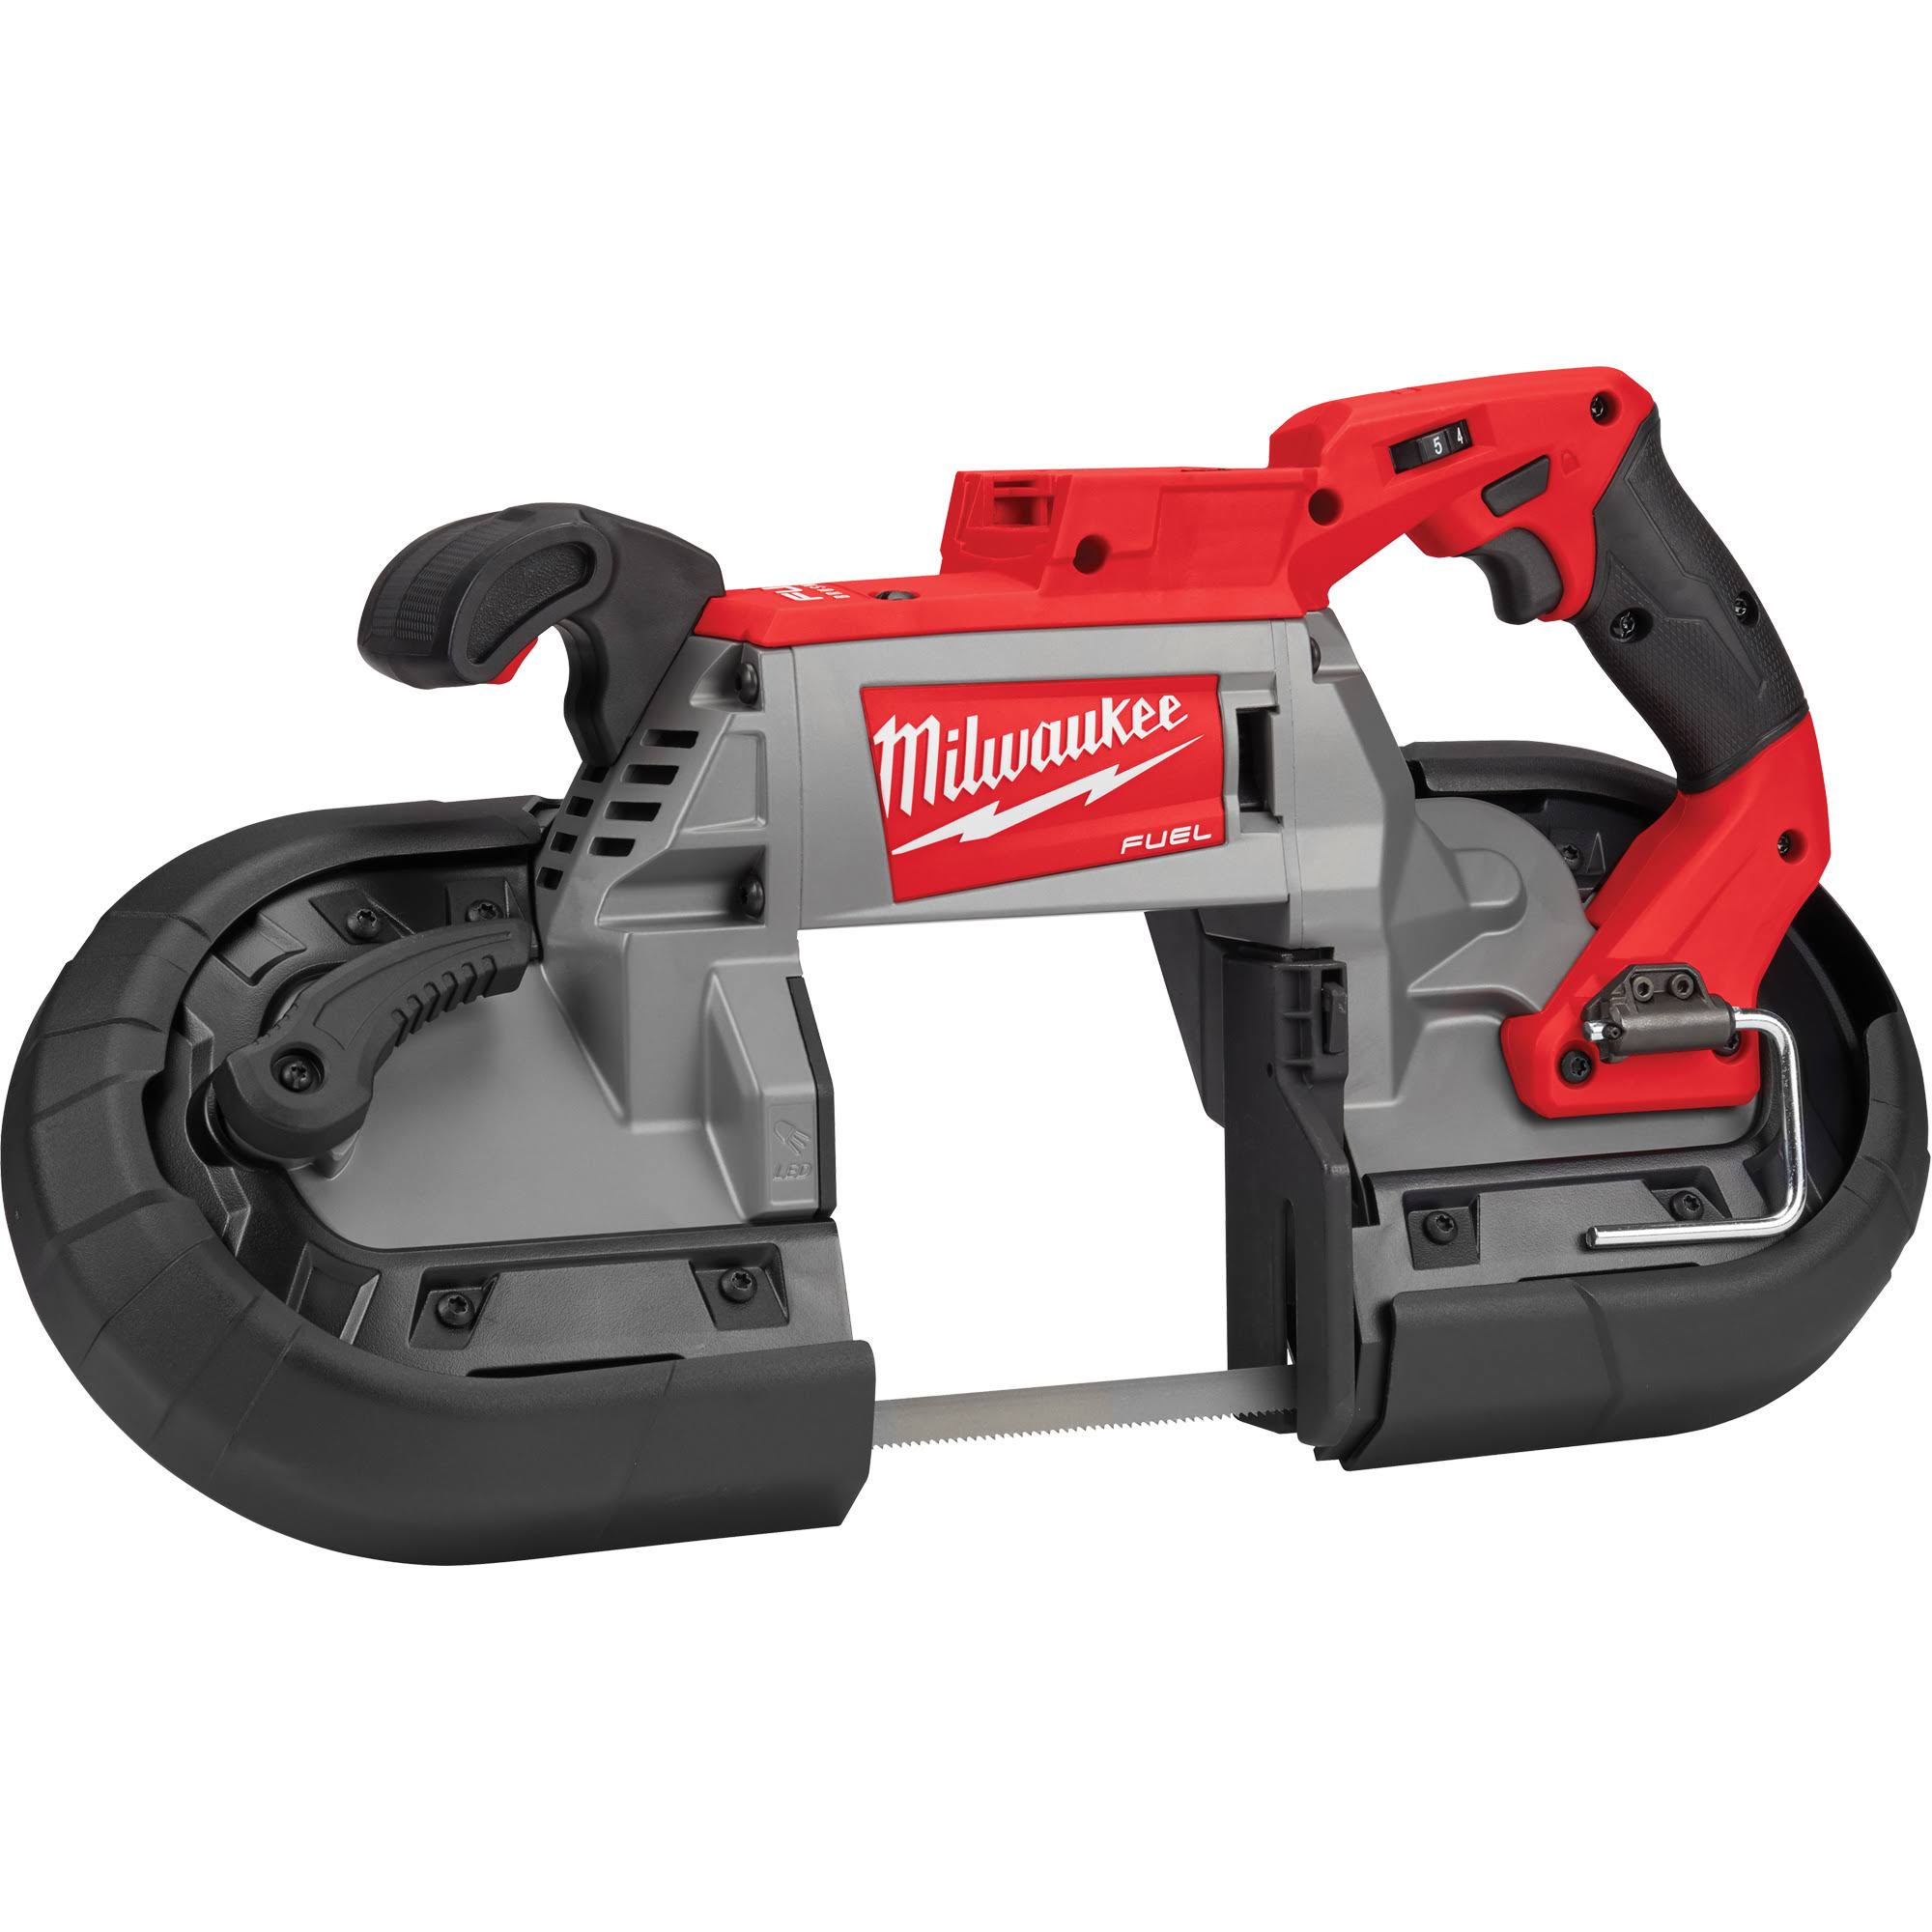 Milwaukee 2729S-20 M18 FUEL Deep Cut Dual-Trigger Band Saw - Tool Only